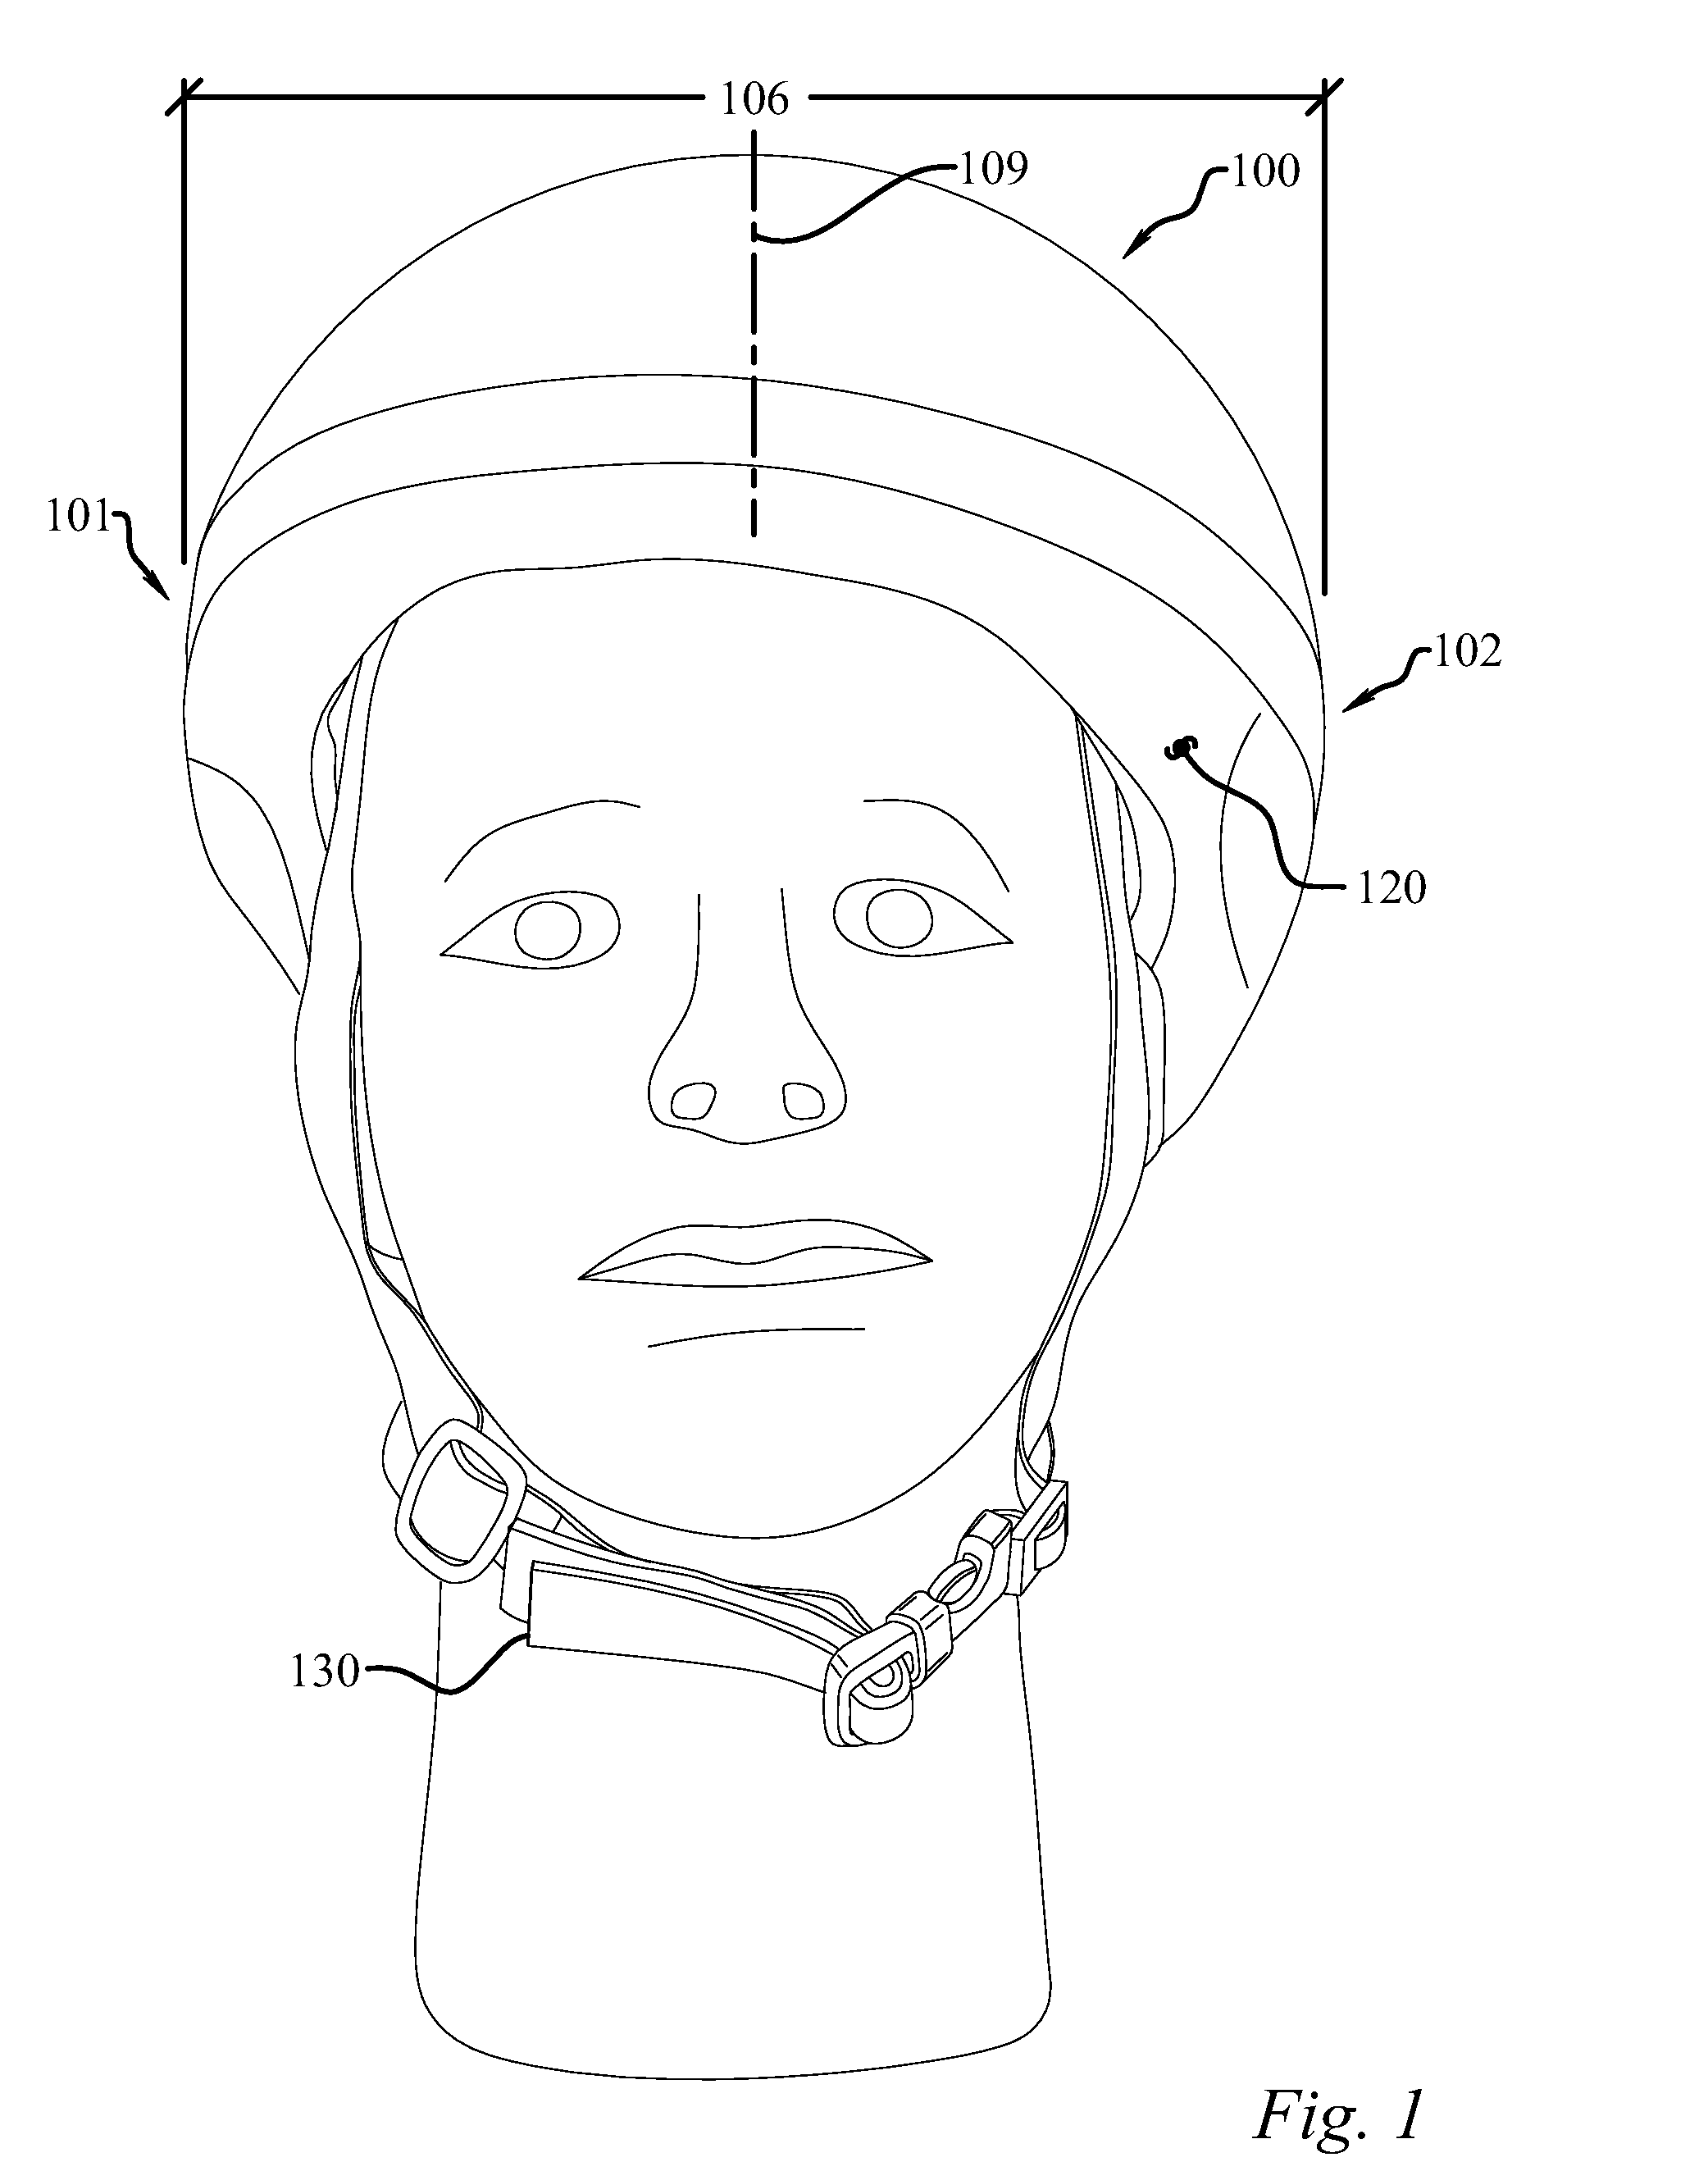 Chin protection system